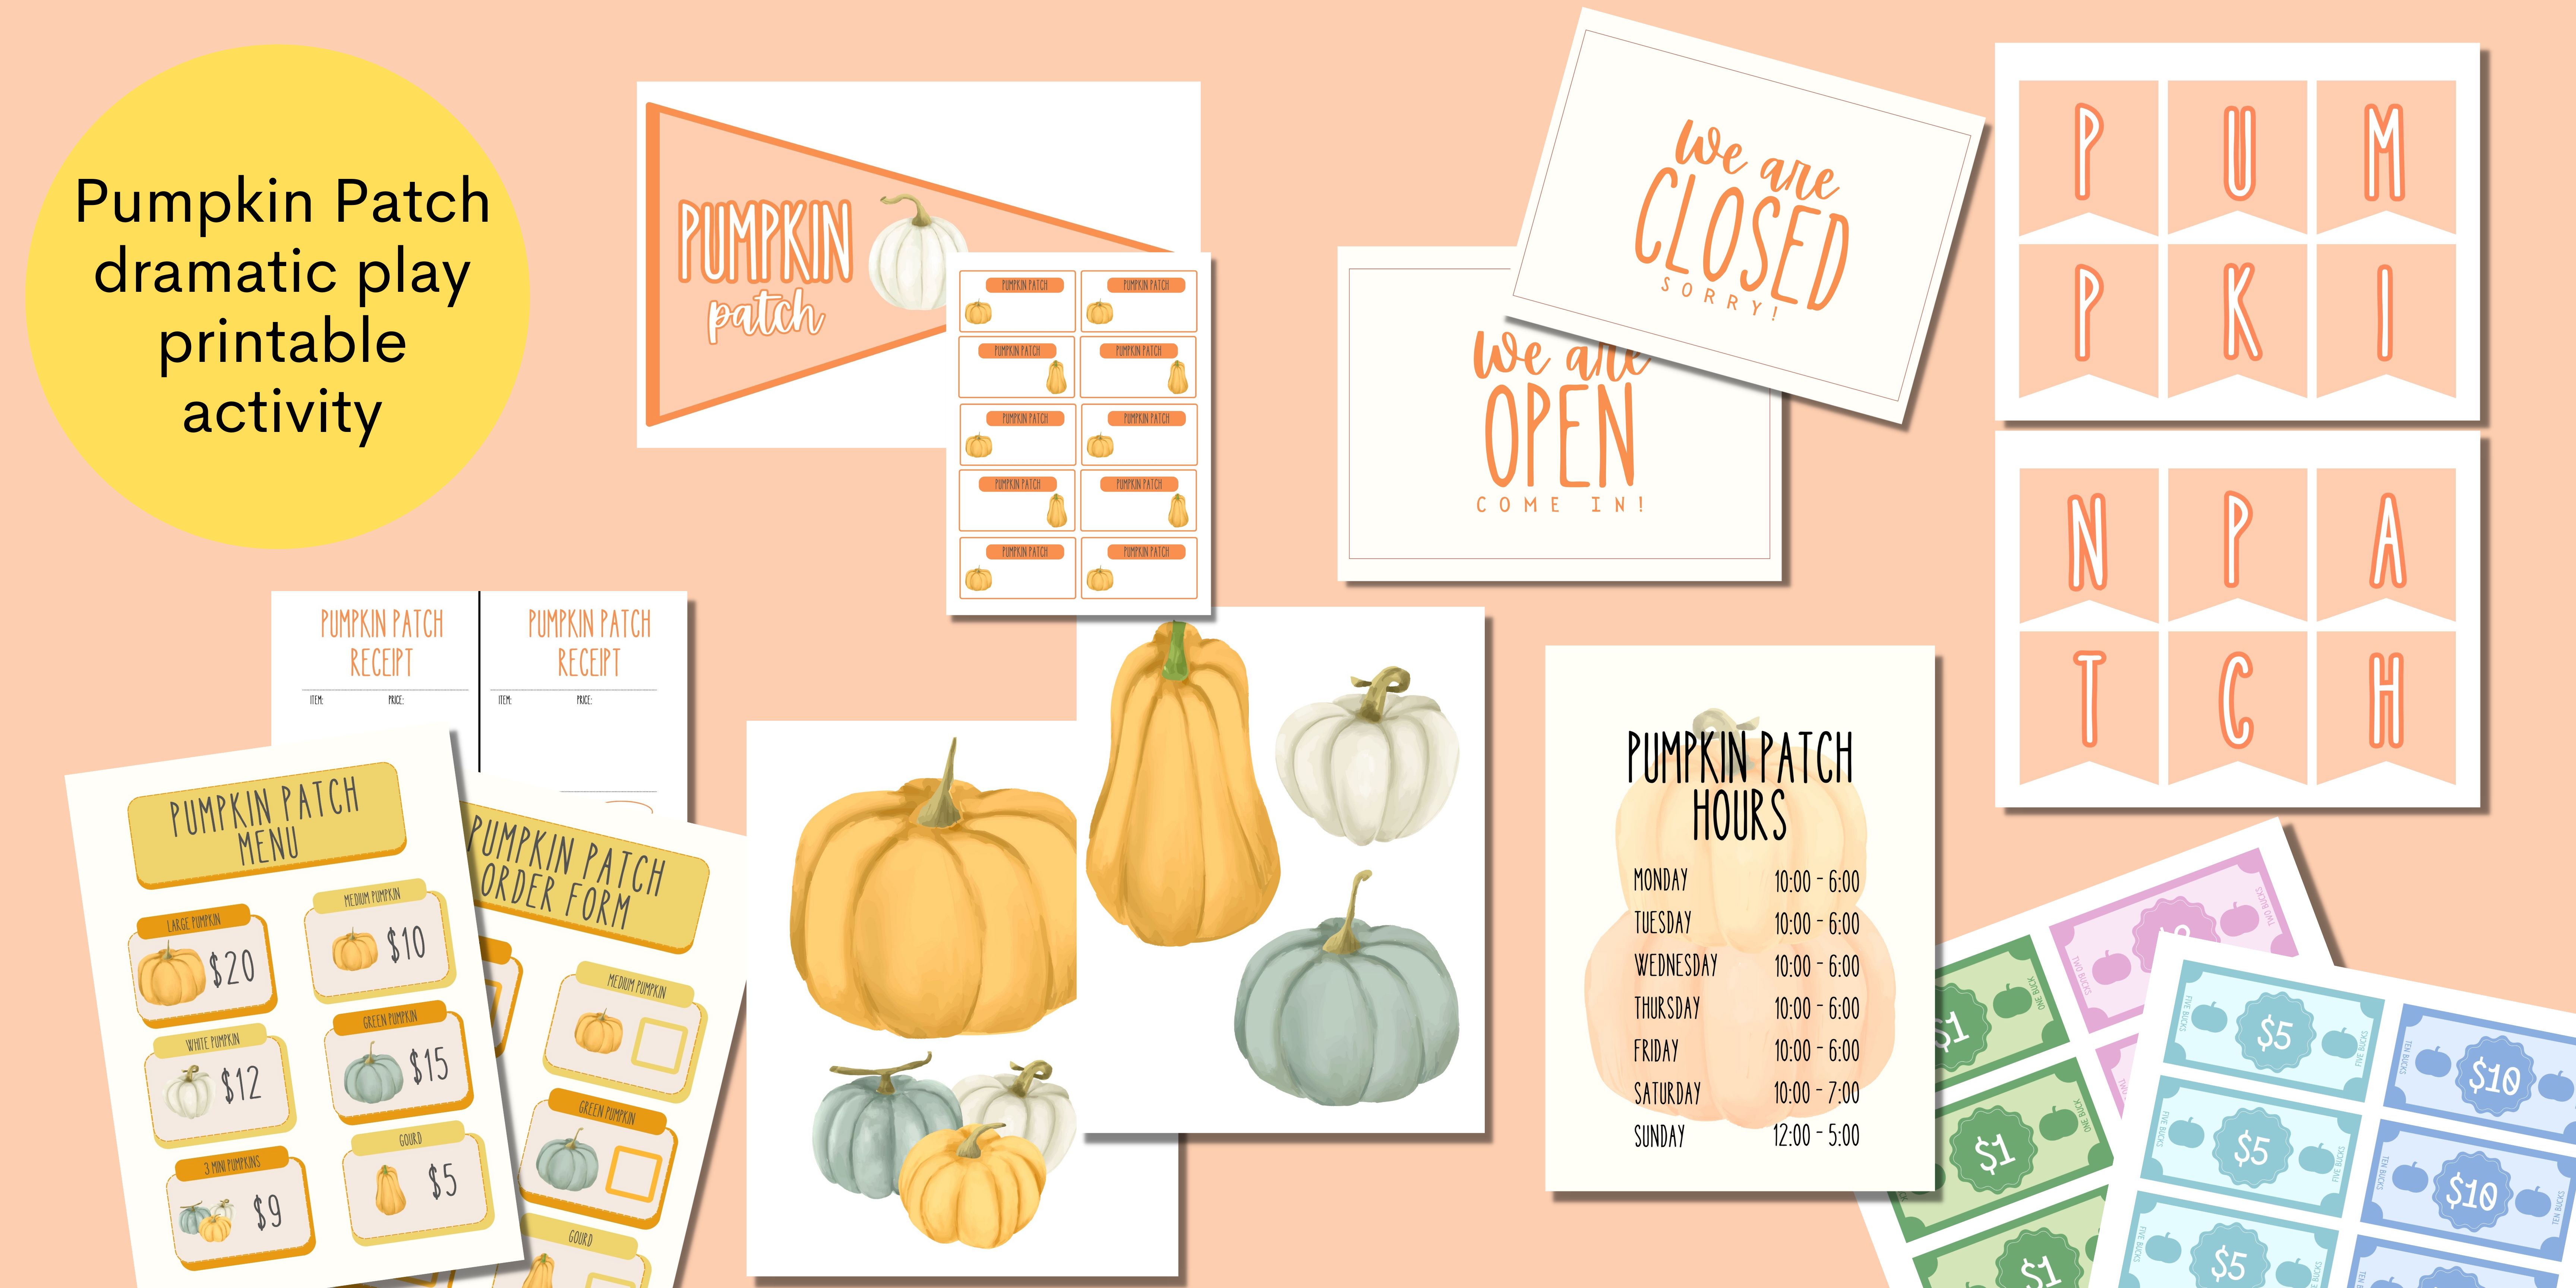 Pumpkin Patch dramatic play printable activity banner